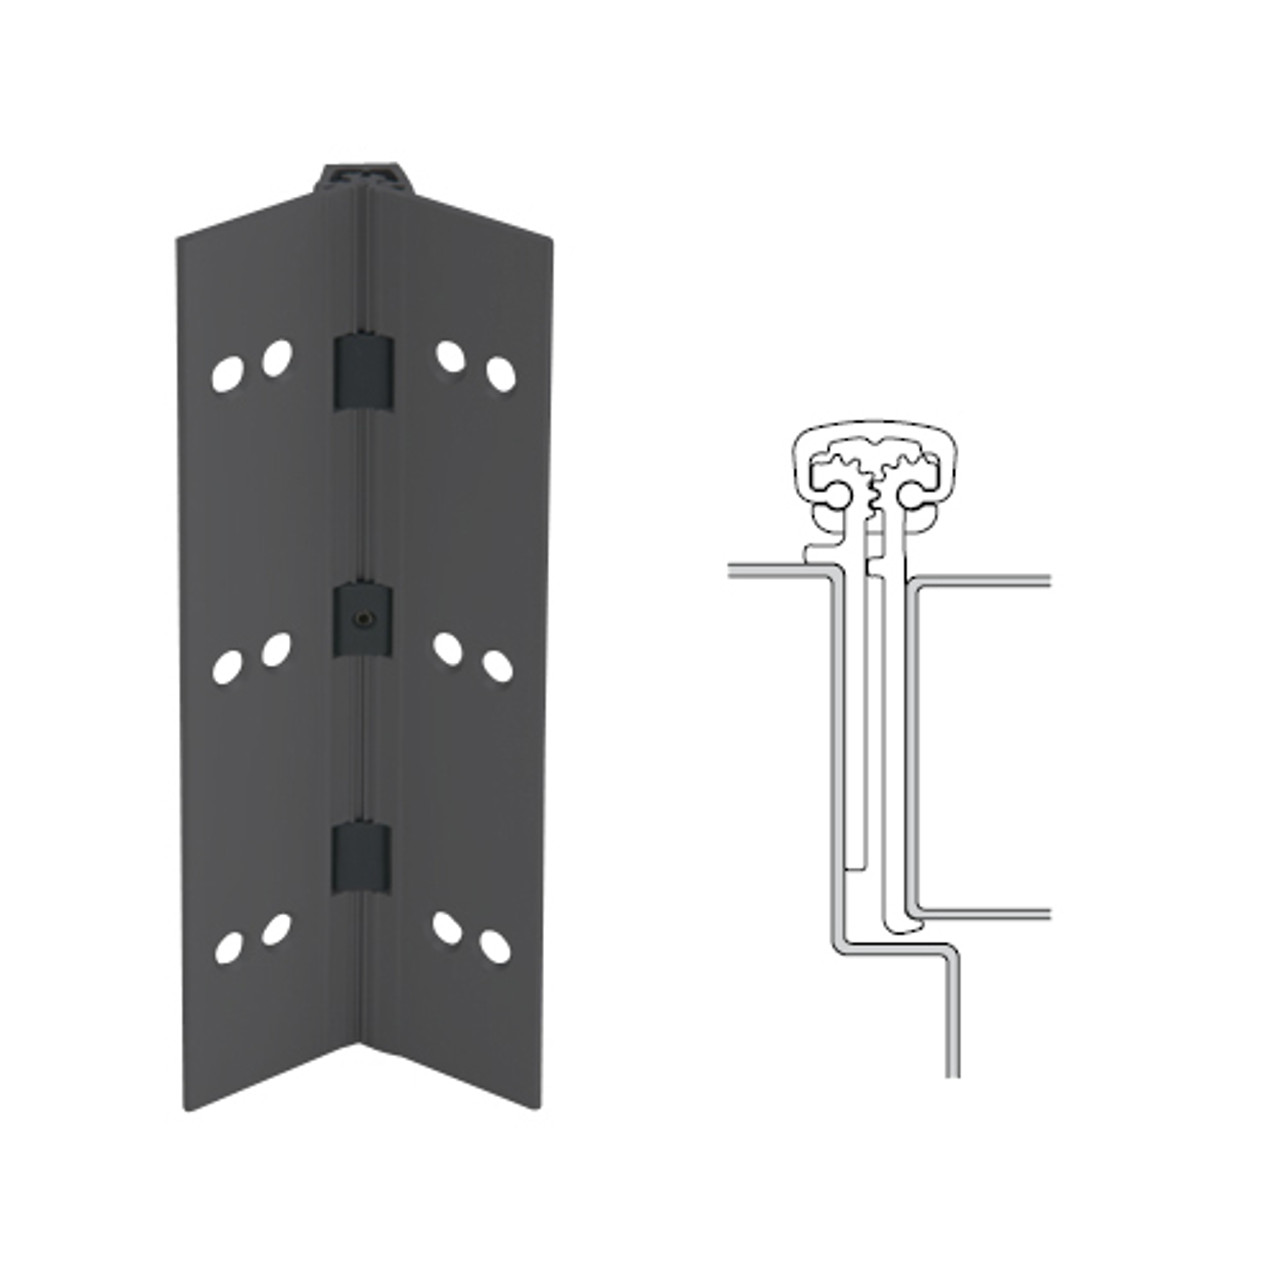 114XY-315AN-95-SECWDWD IVES Full Mortise Continuous Geared Hinges with Security Screws - Hex Pin Drive in Anodized Black